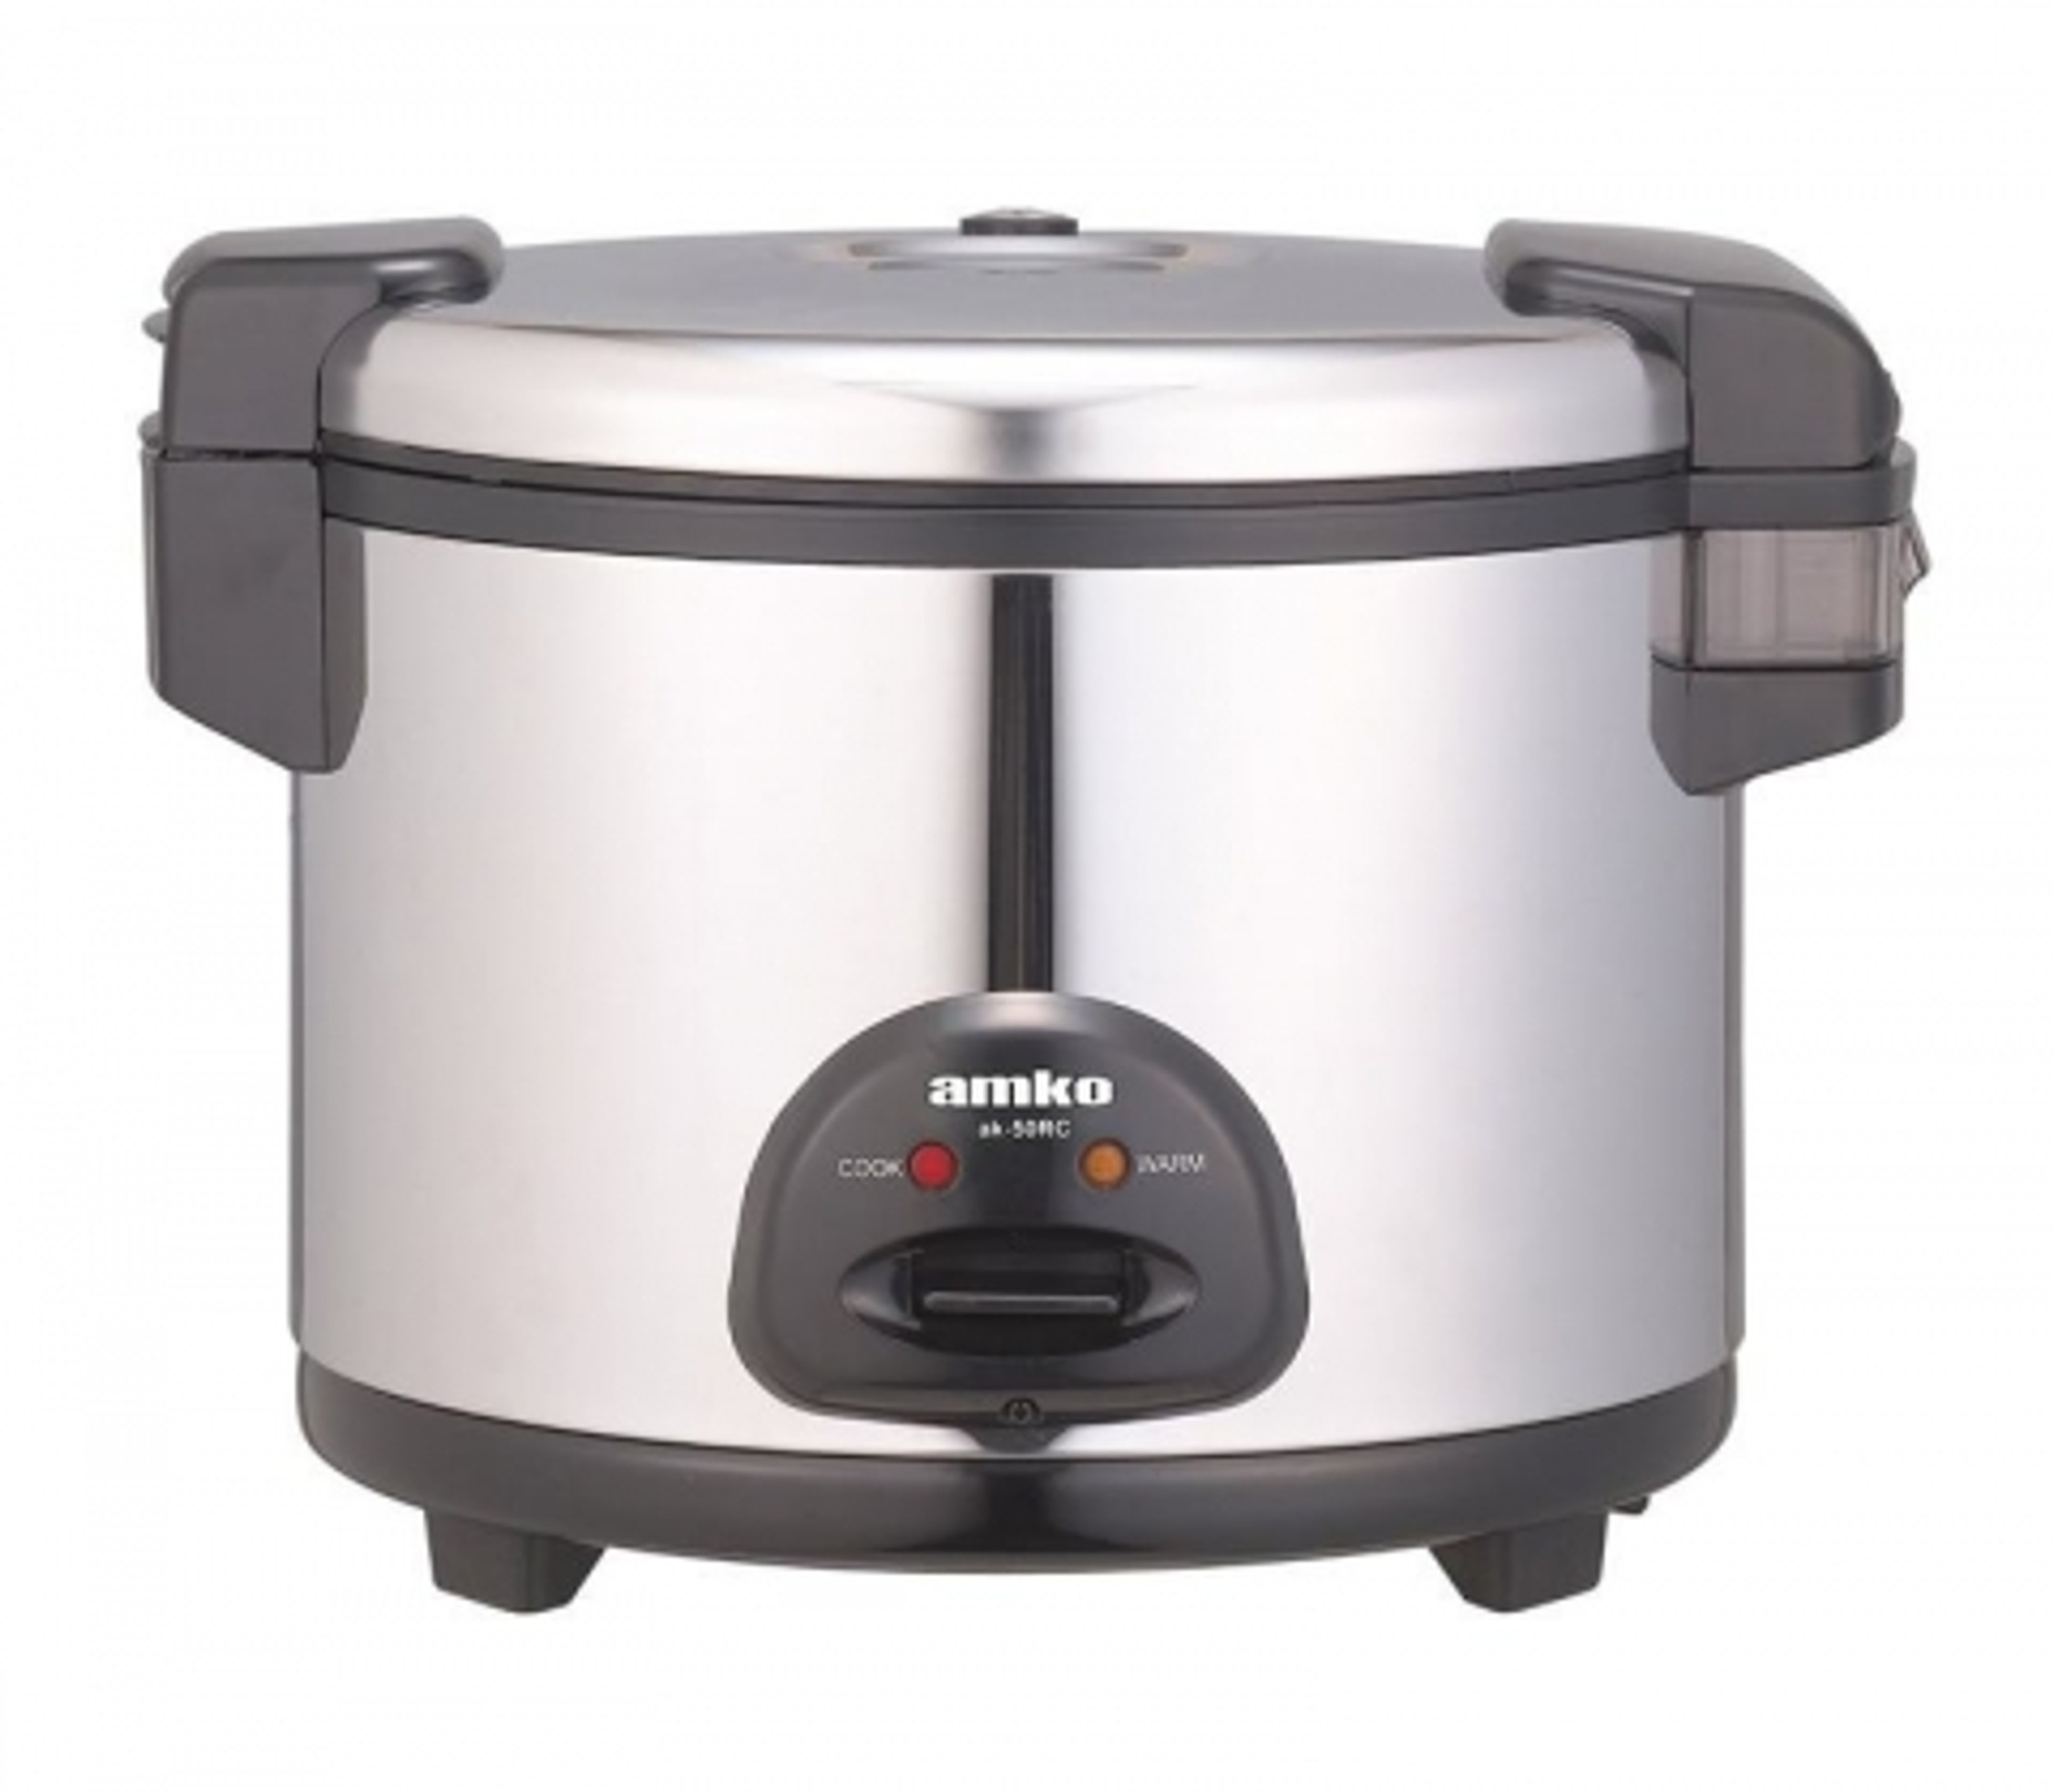 AMKO AK-50RC Electric Rice Cooker/Warmer, 5.0L, 62 Bowls - Win Depot